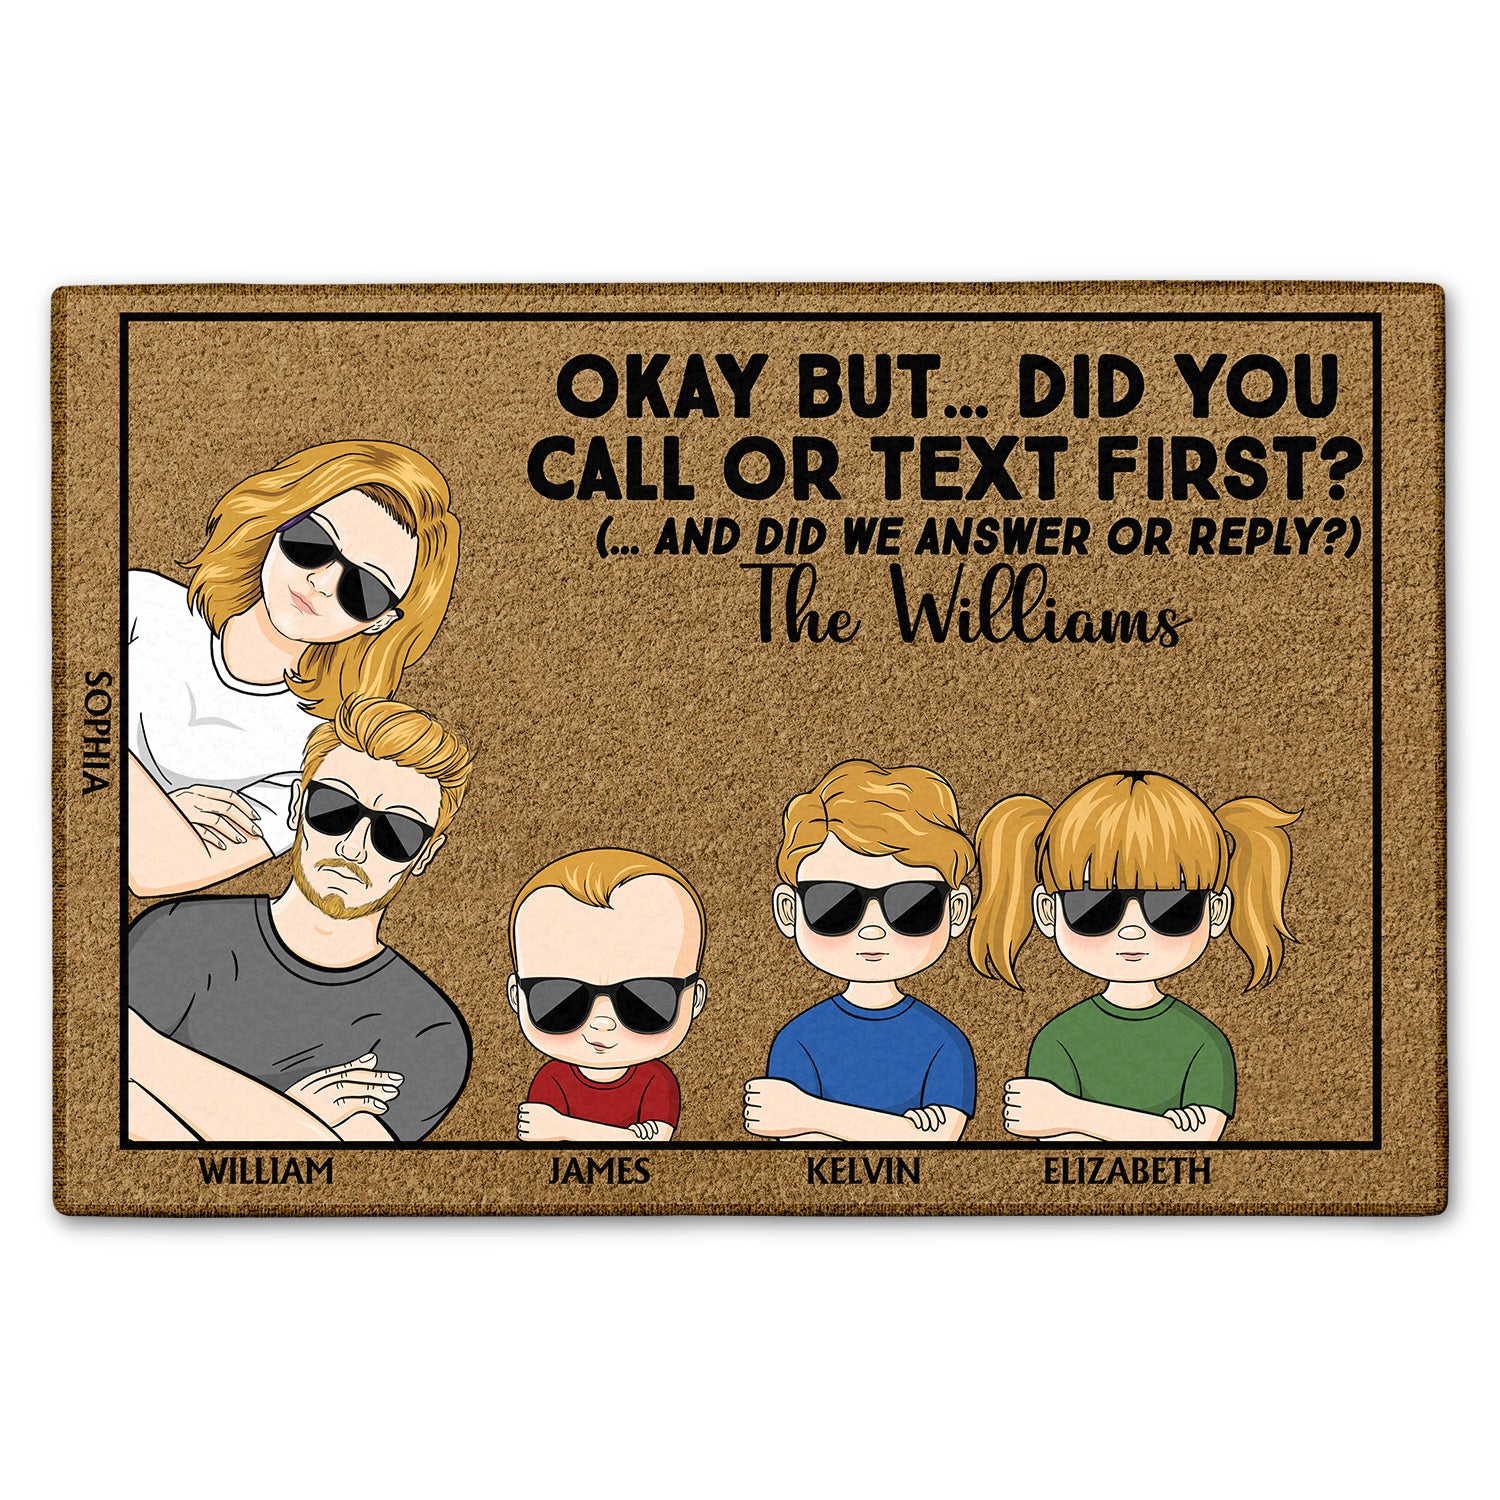 Okay But Did You Call Or Text First Couples - Anniversary, Birthday, Housewarming Gift For Spouse, Husband, Wife, Family - Personalized Custom Doormat